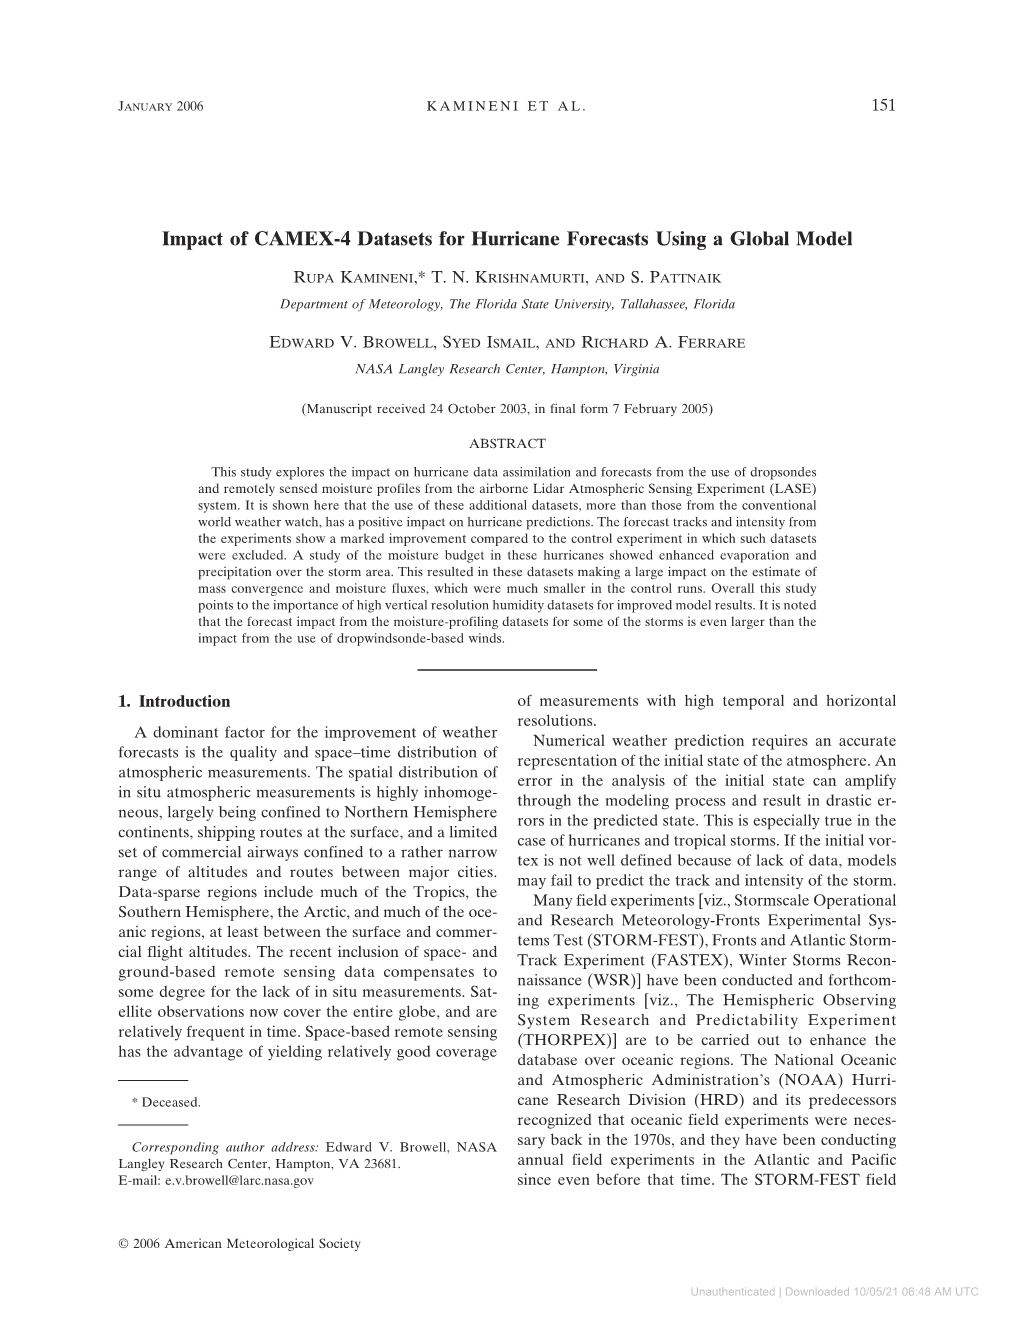 Impact of CAMEX-4 Datasets for Hurricane Forecasts Using a Global Model